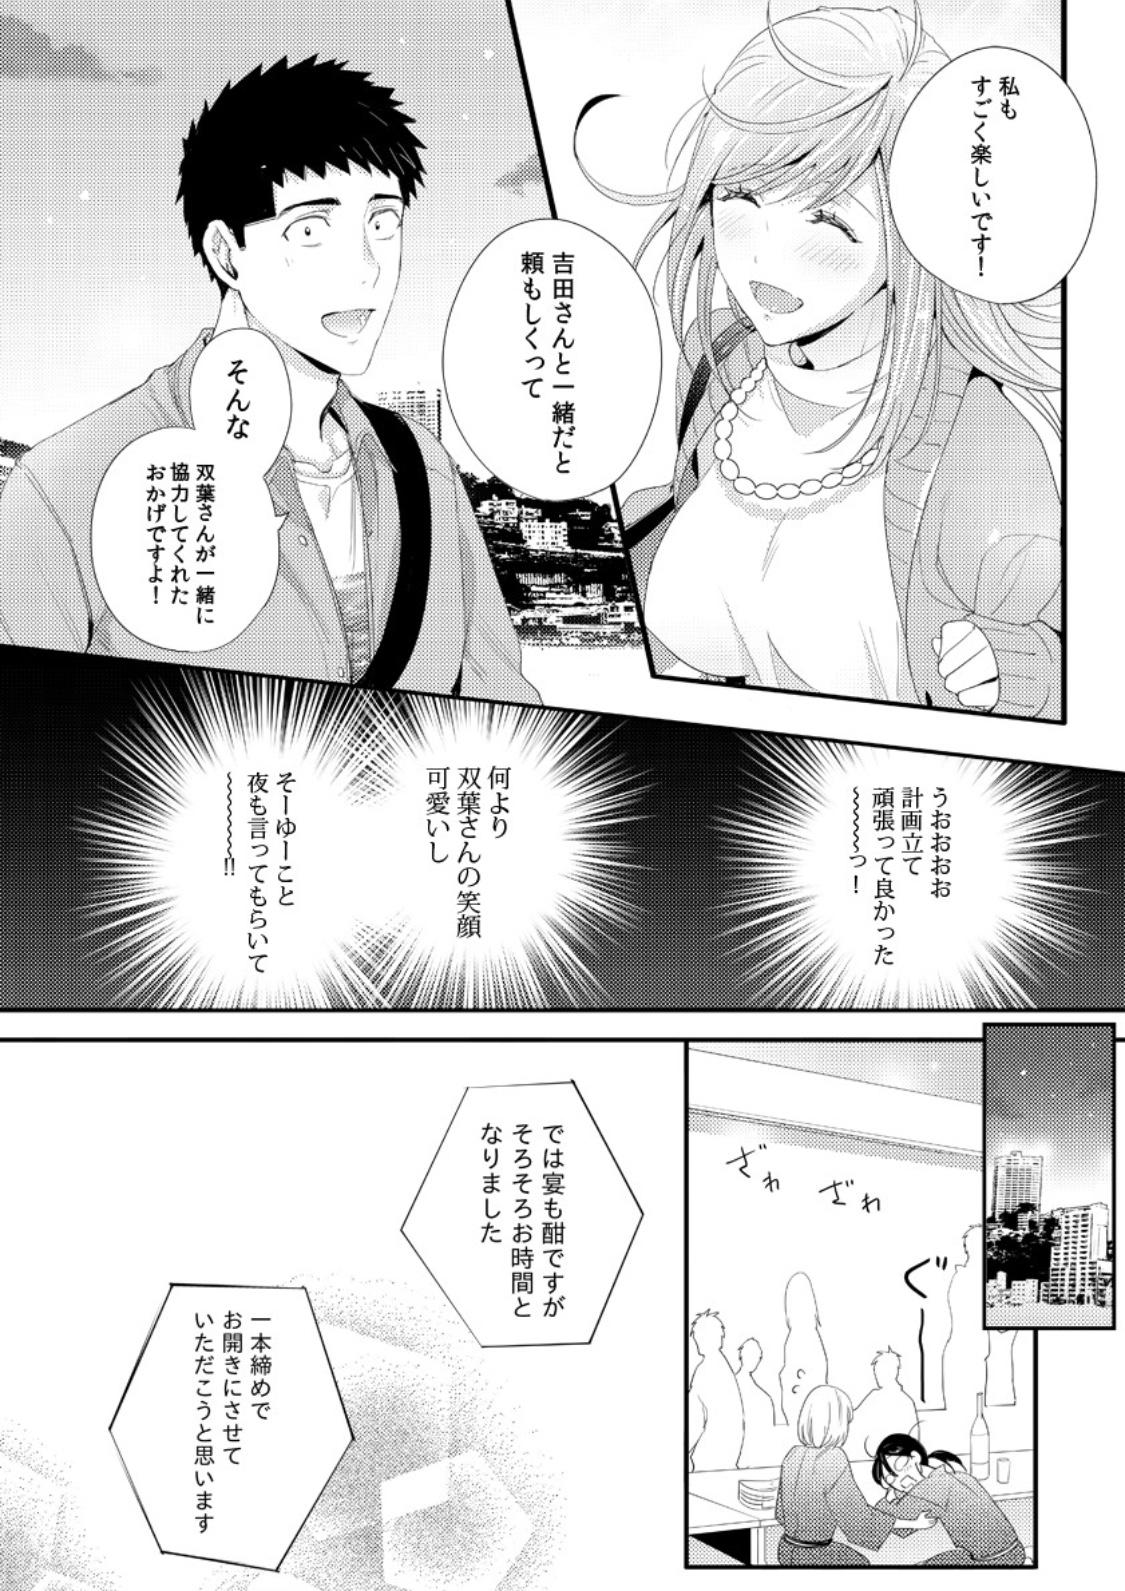 Please Let Me Hold You Futaba-San! Ch. 1-4 9